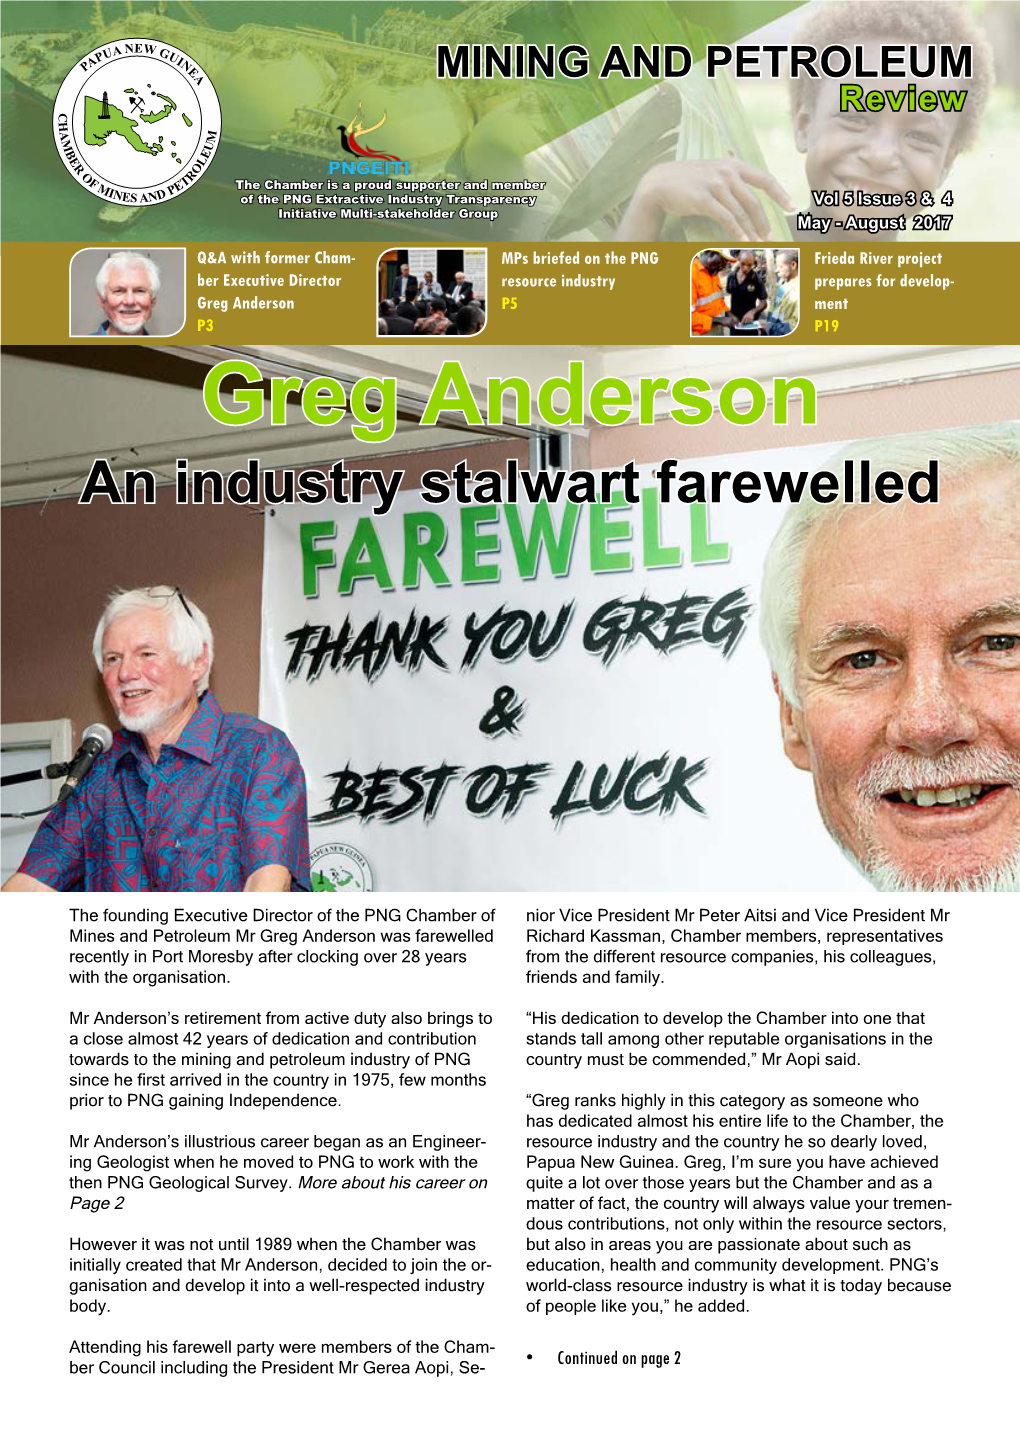 Greg Anderson P5 Ment P3 P19 Greg Anderson an Industry Stalwart Farewelled